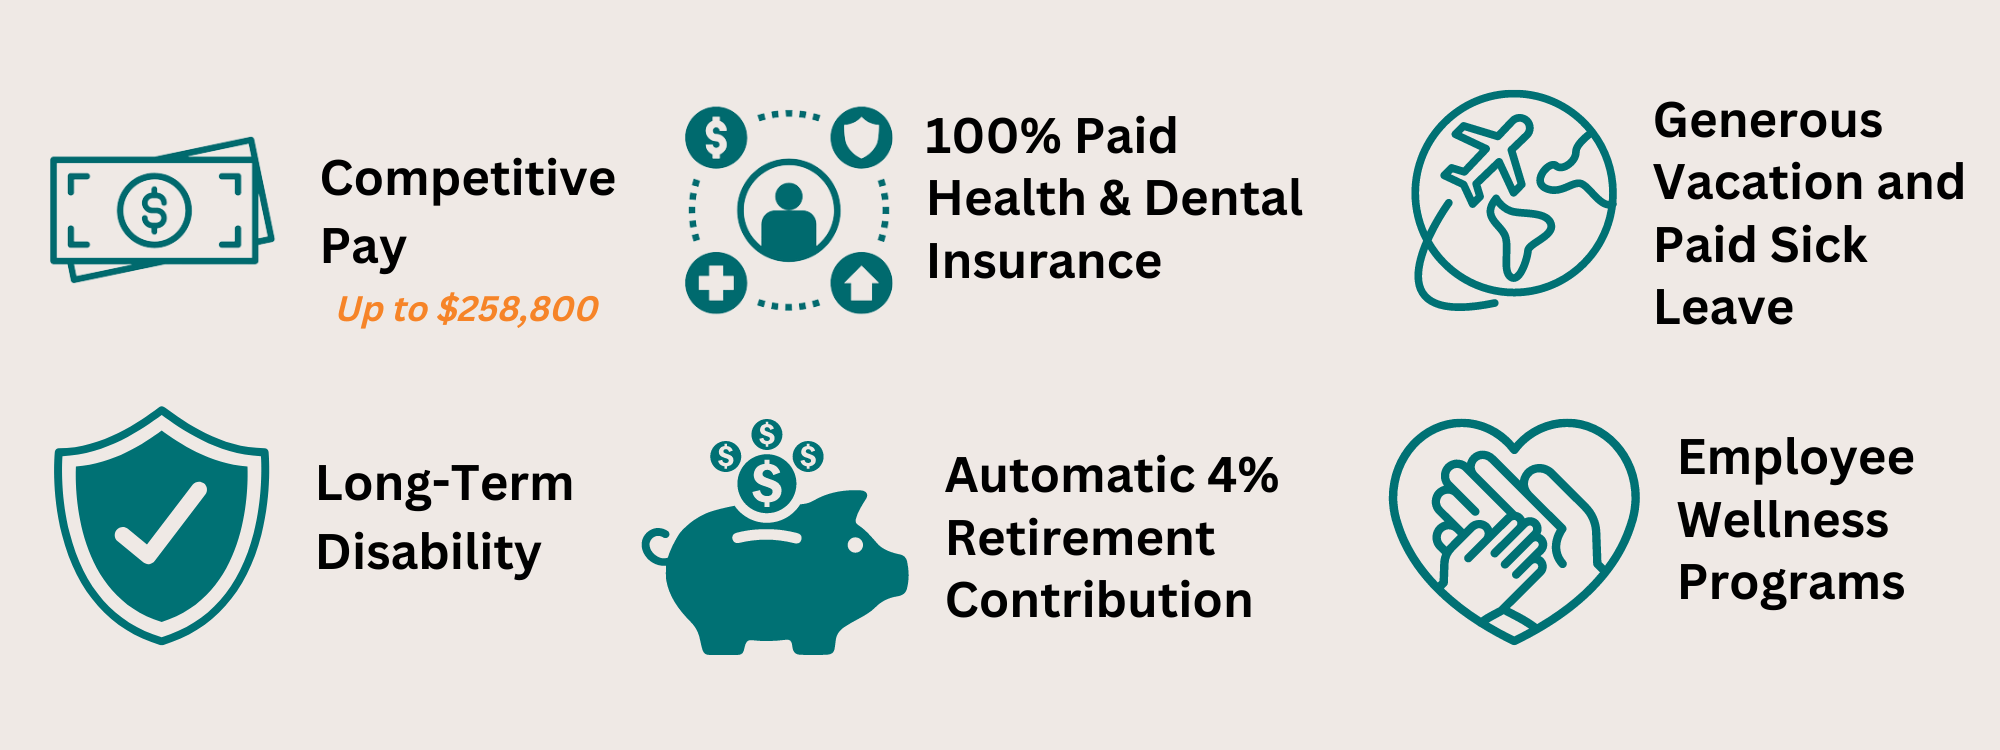 Benefits Graphic for COO Position